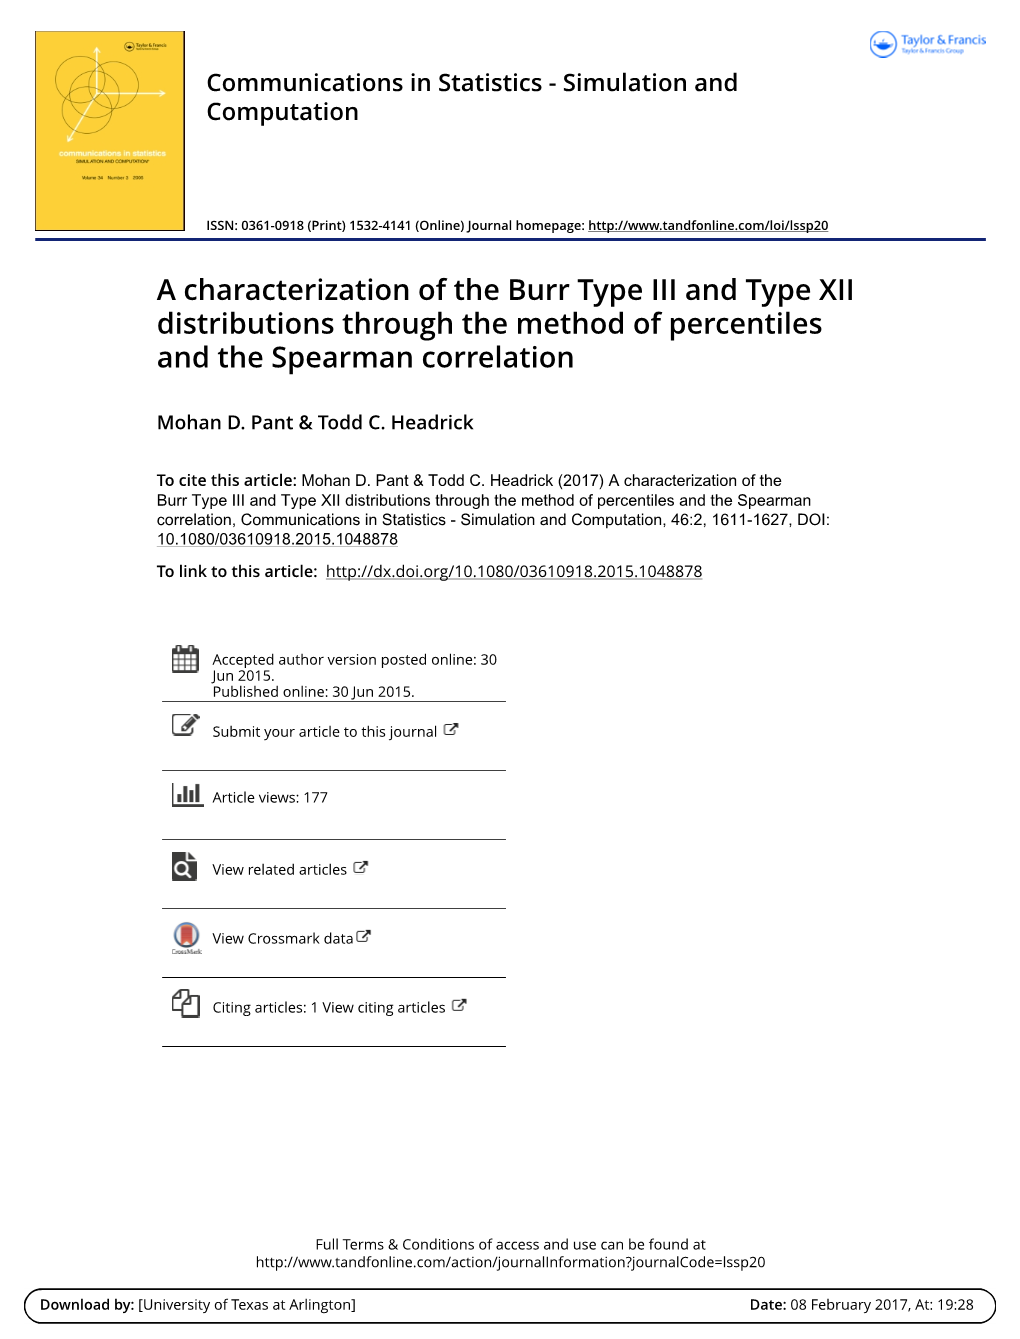 A Characterization of the Burr Type III and Type XII Distributions Through the Method of Percentiles and the Spearman Correlation